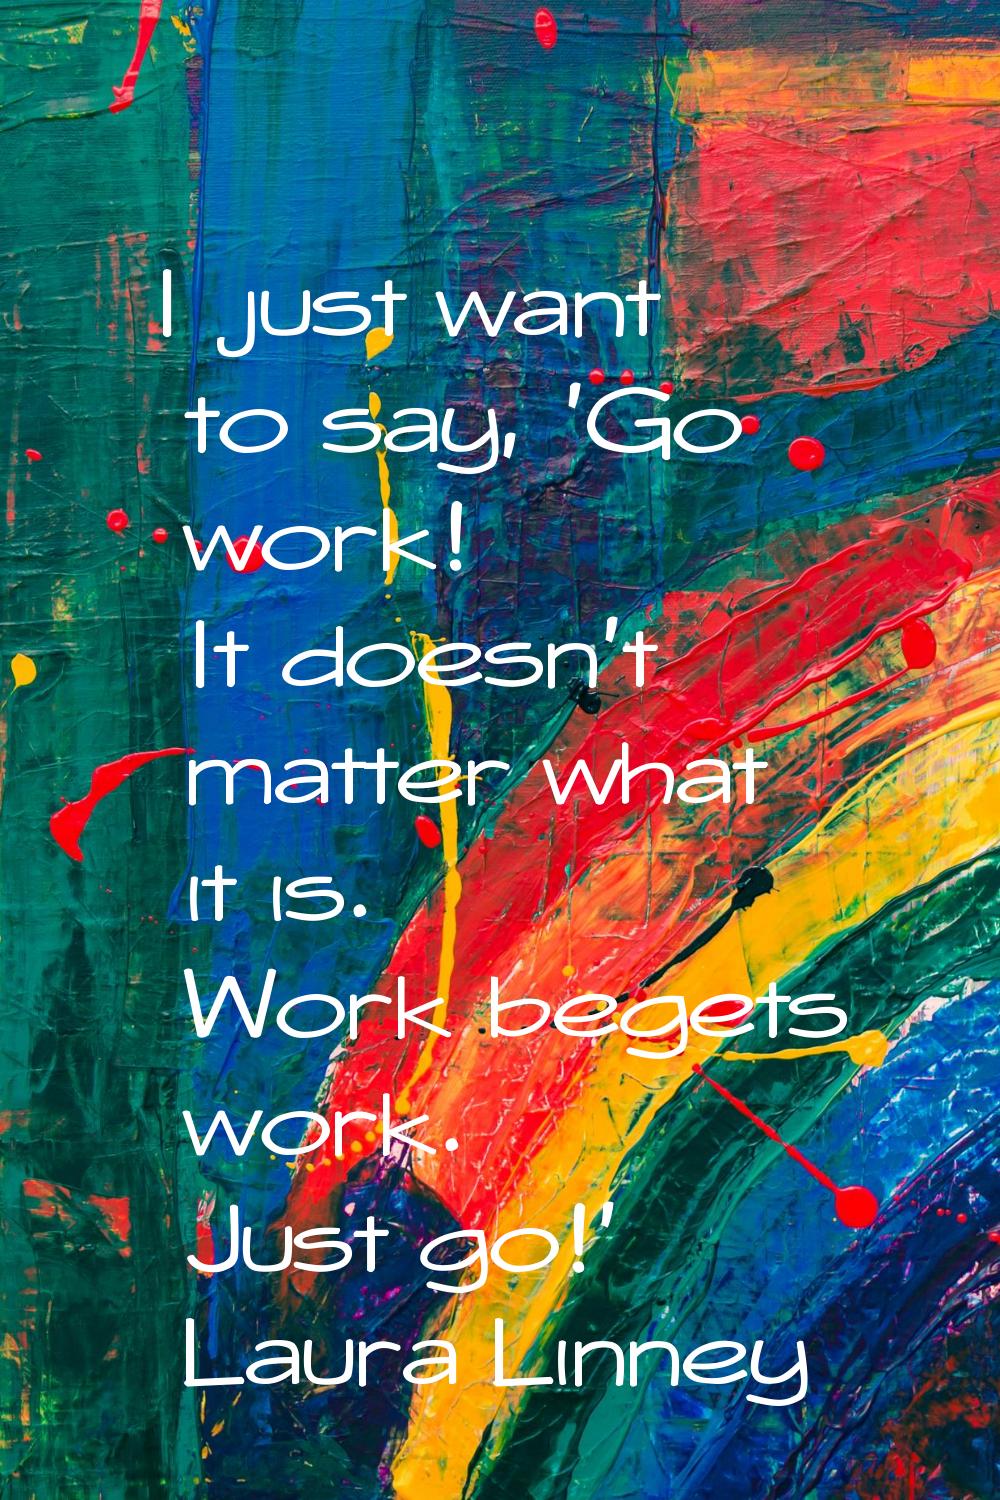 I just want to say, 'Go work! It doesn't matter what it is. Work begets work. Just go!'